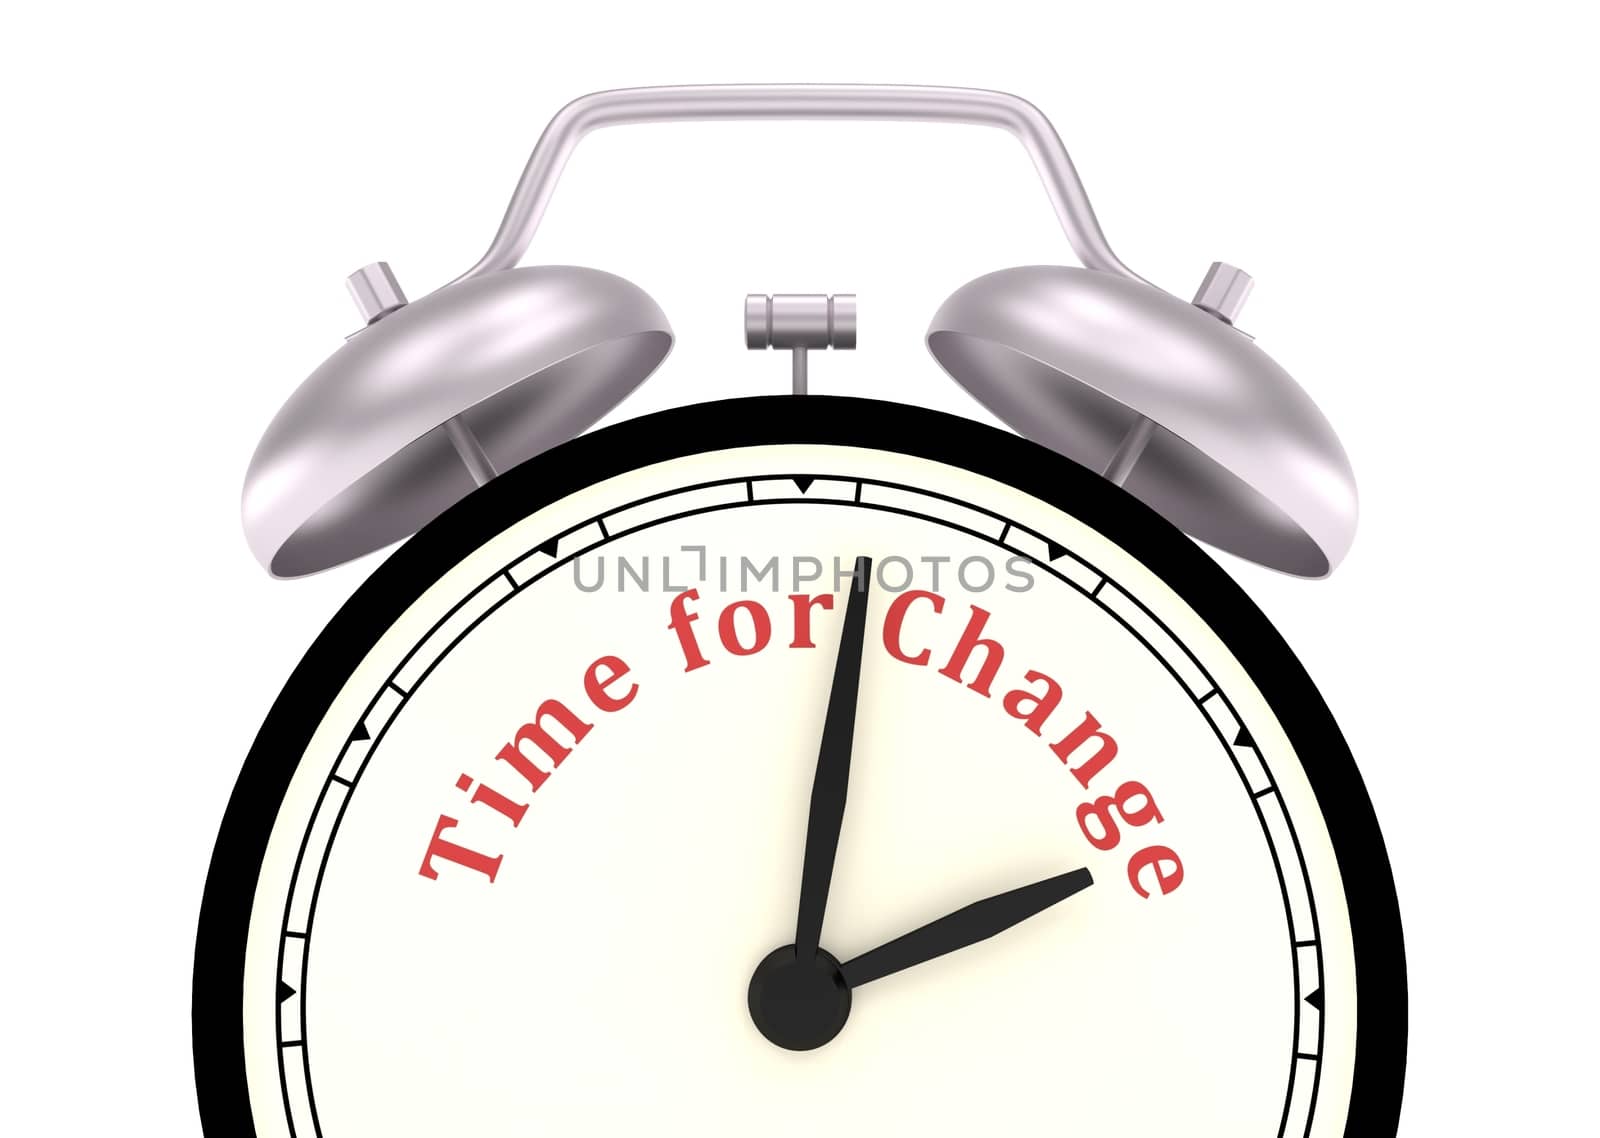 Illustration of an alarm clock with the words "Time for change" on the face